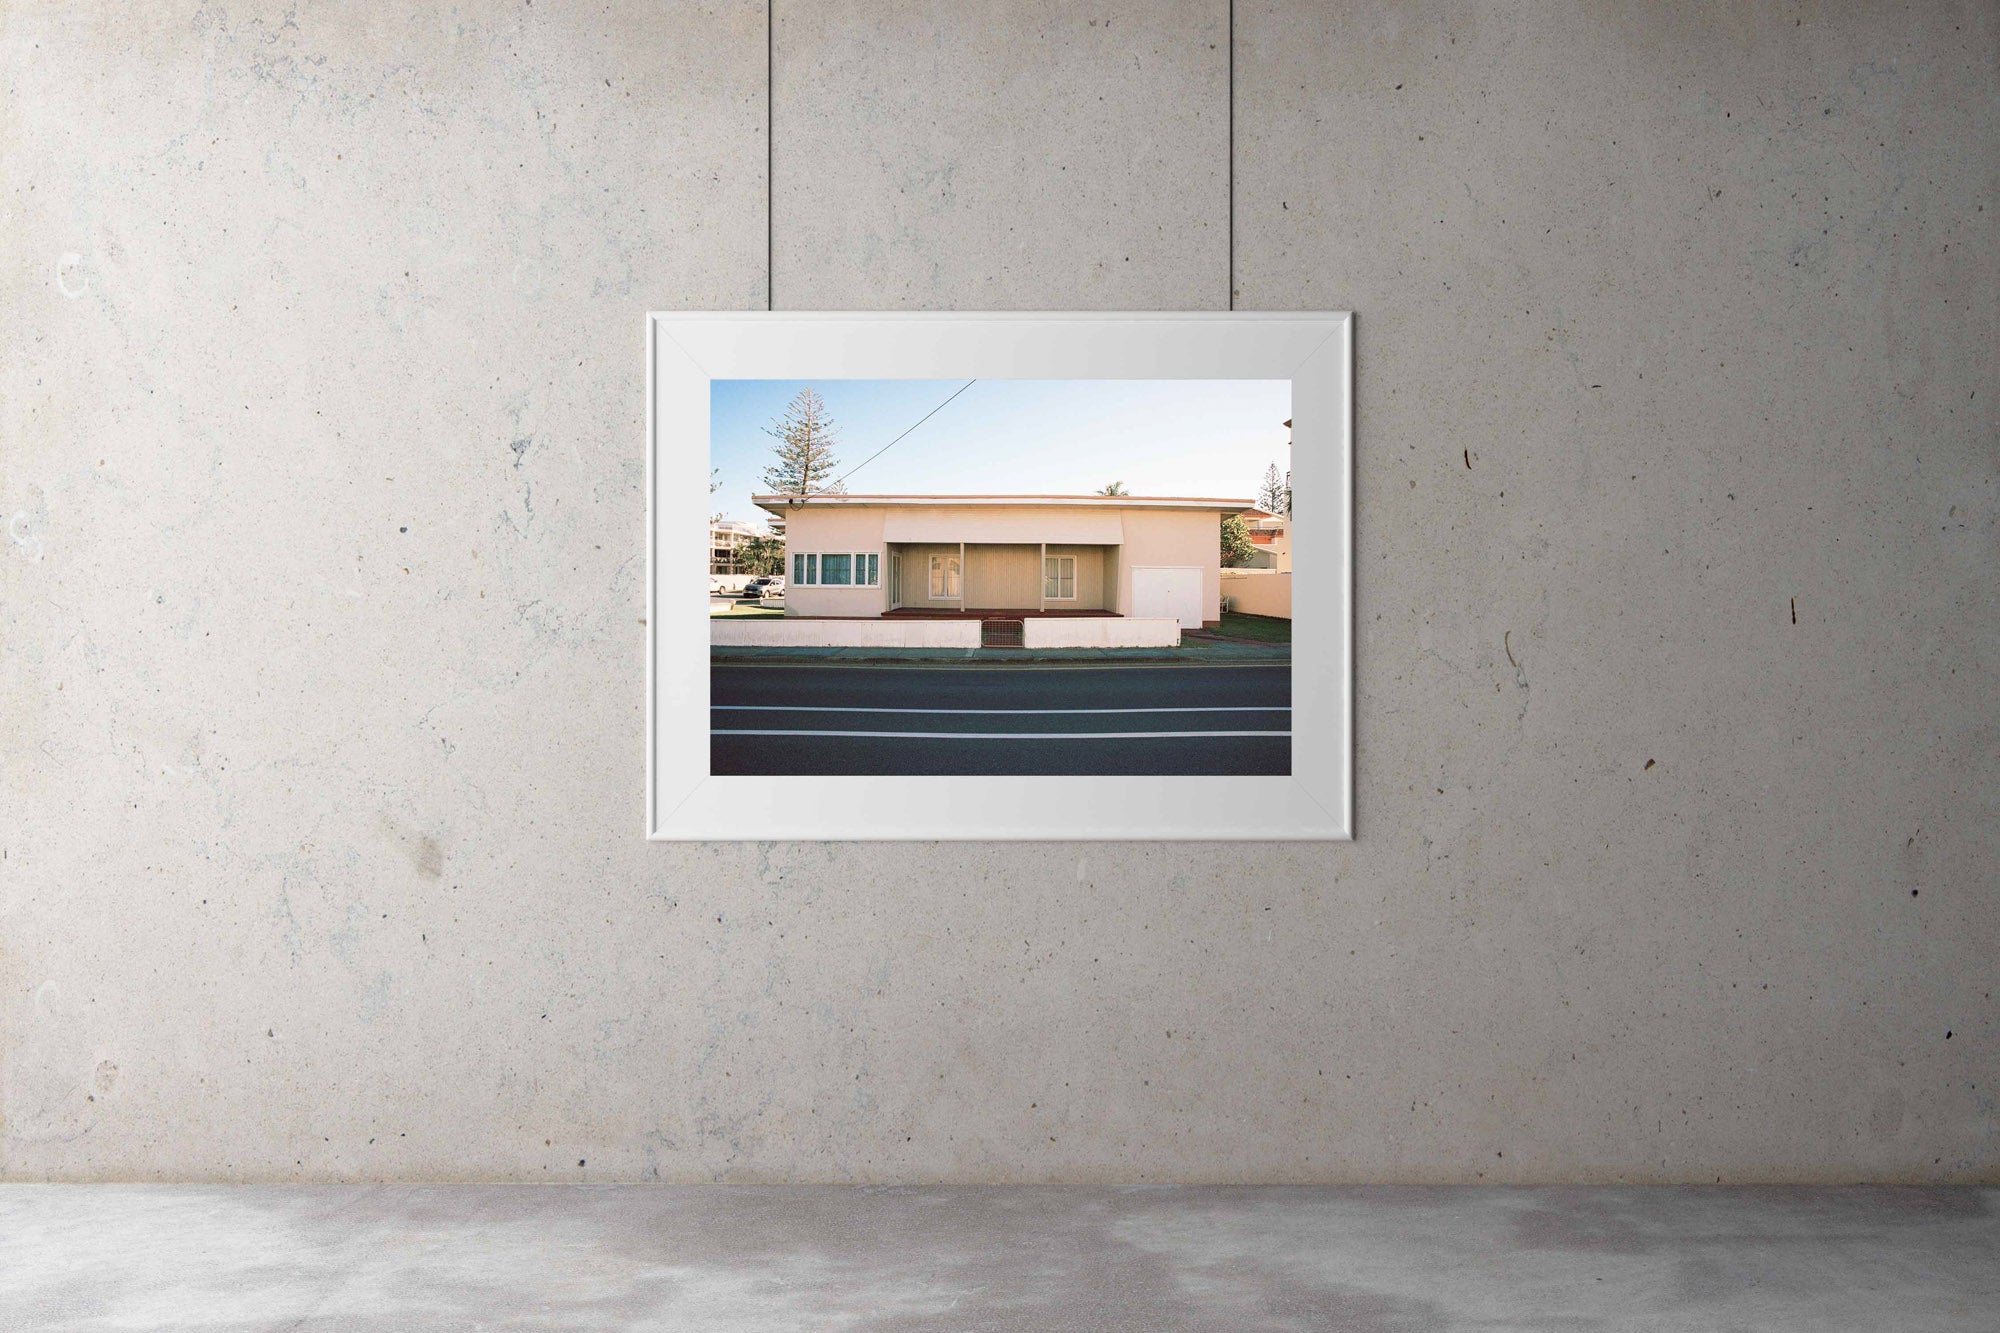 “A 1950’s wood panelled house, painted cream colour with an Art Deco vintage style on a street”. Artwork, Prints, wallart, GoldCoast Queensland Australia, Photographic prints, Ocean Beach, Framed artwork, Beach Posters   Film photography, Vintage photo style,  Interior design, Film photography Pictures sun & surf, 